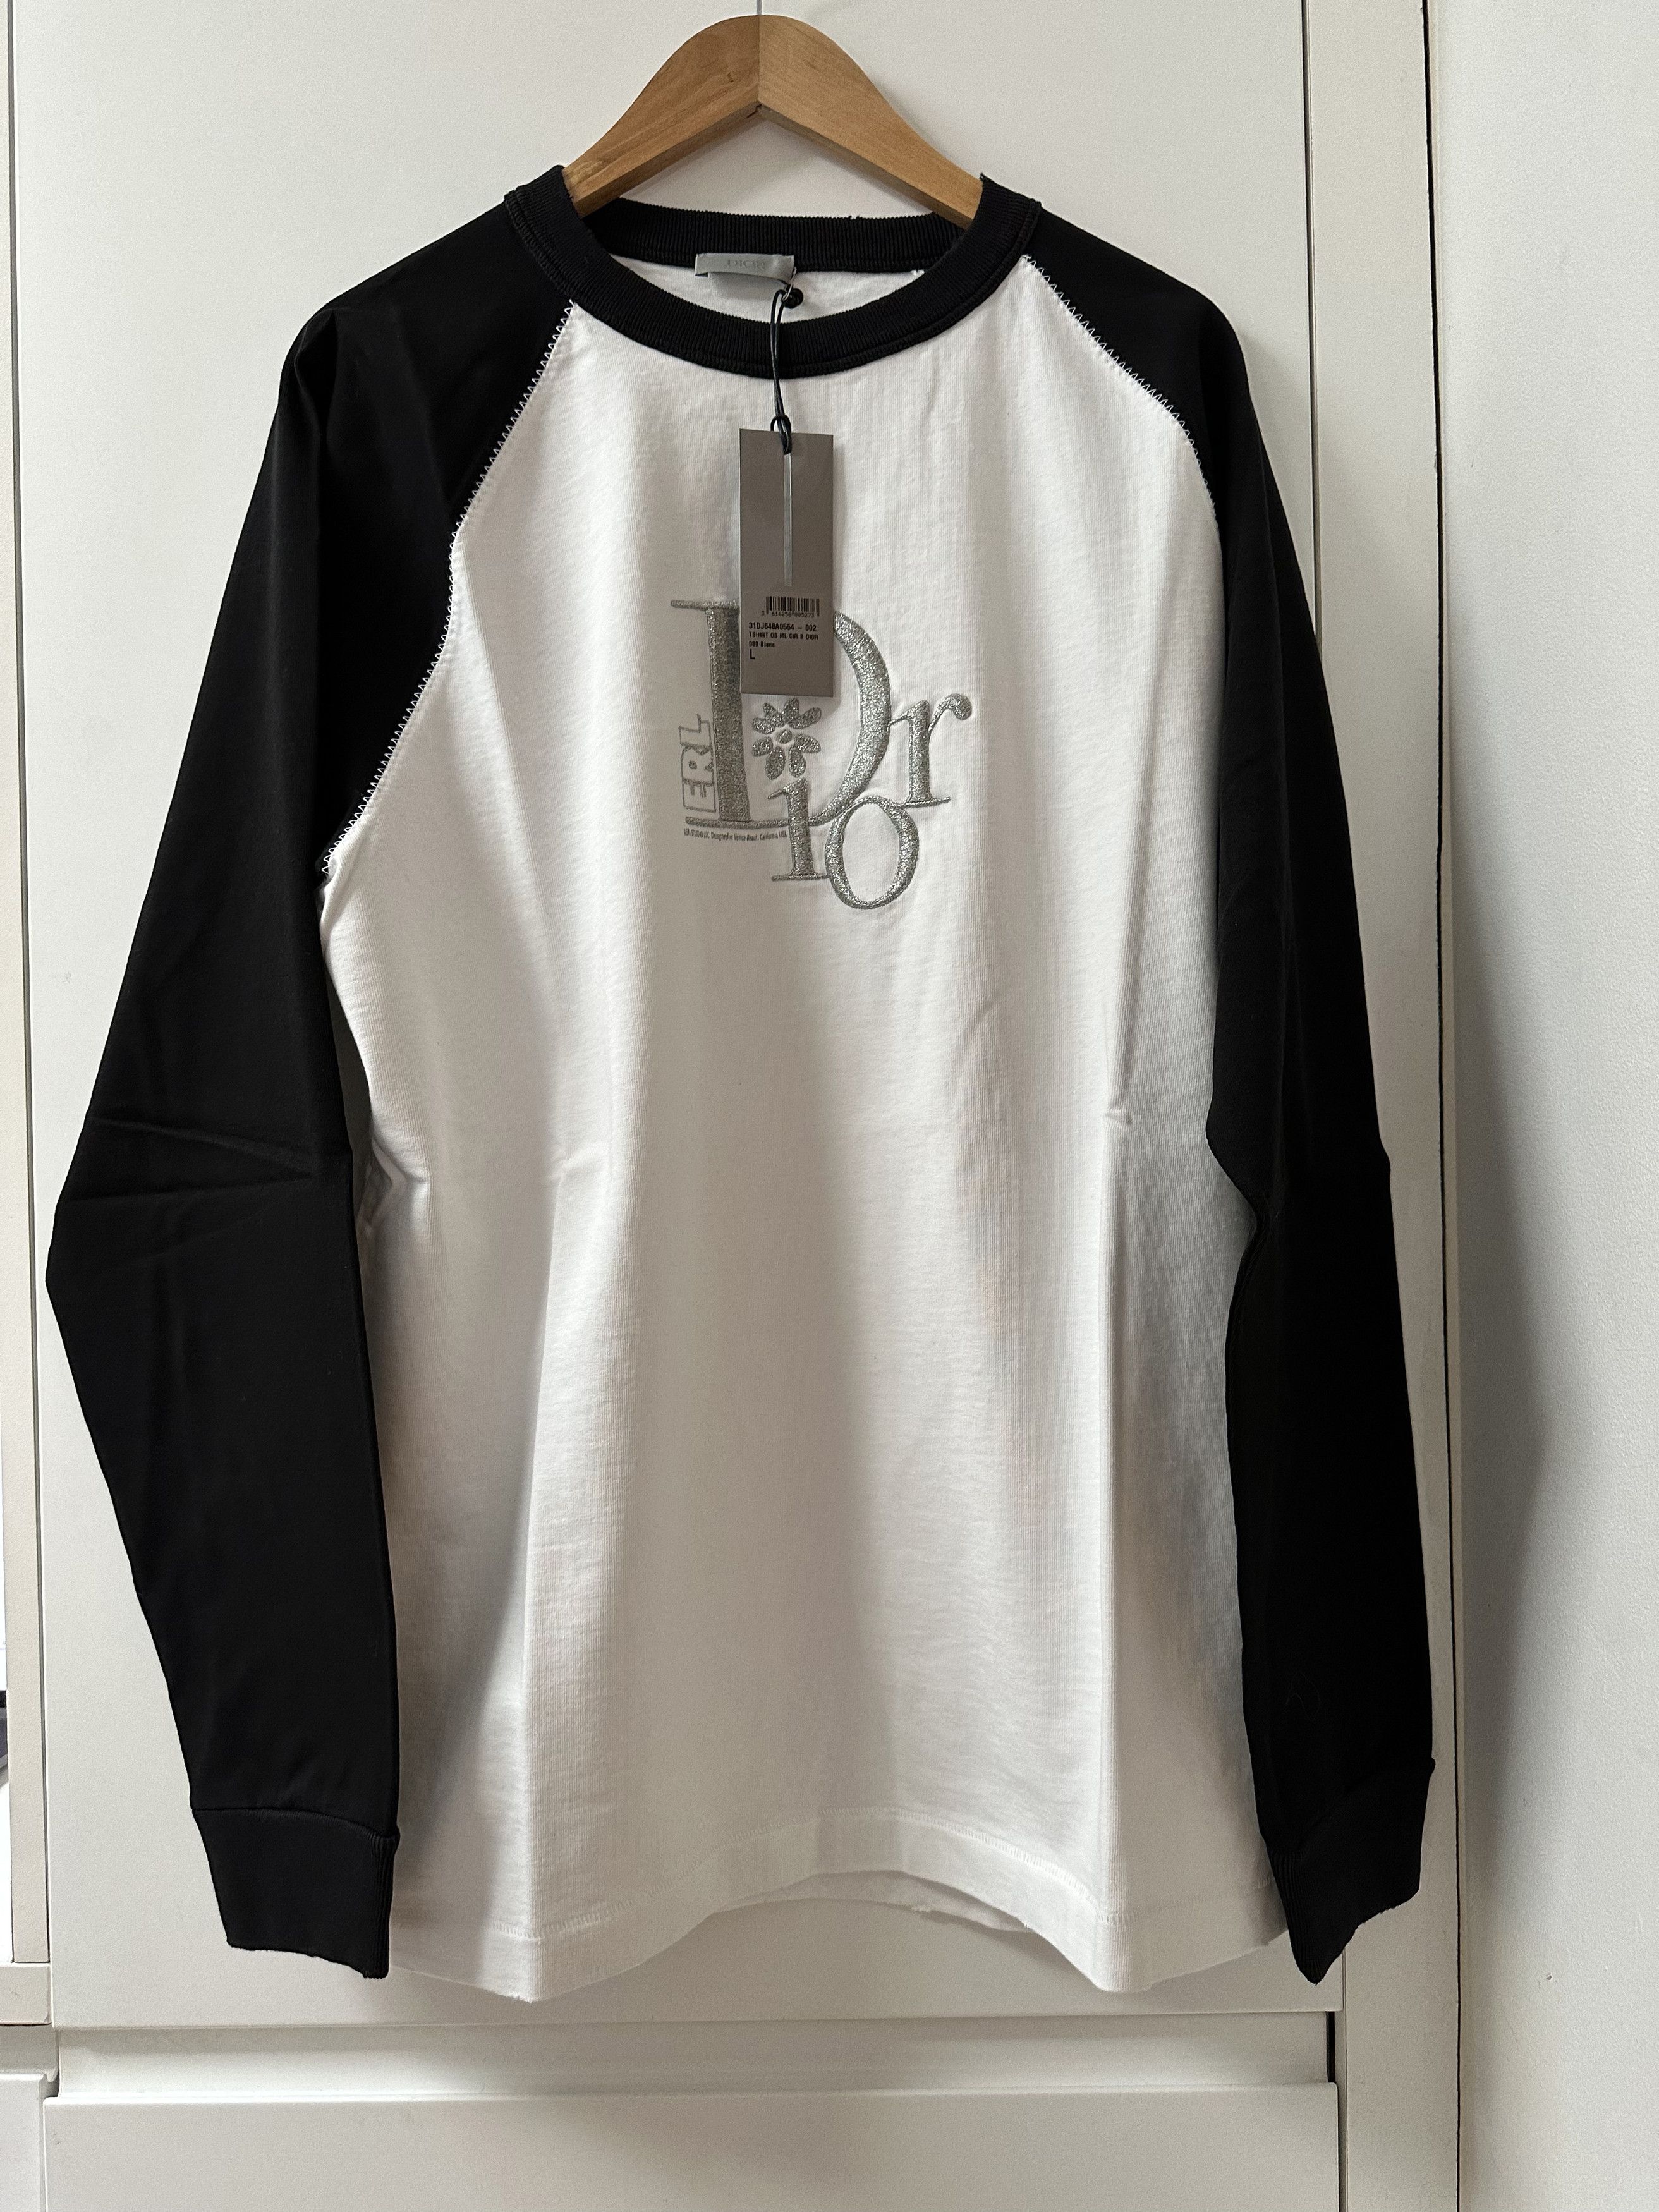 Dior Dior x ERL Long Sleeve T-shirt New | Grailed